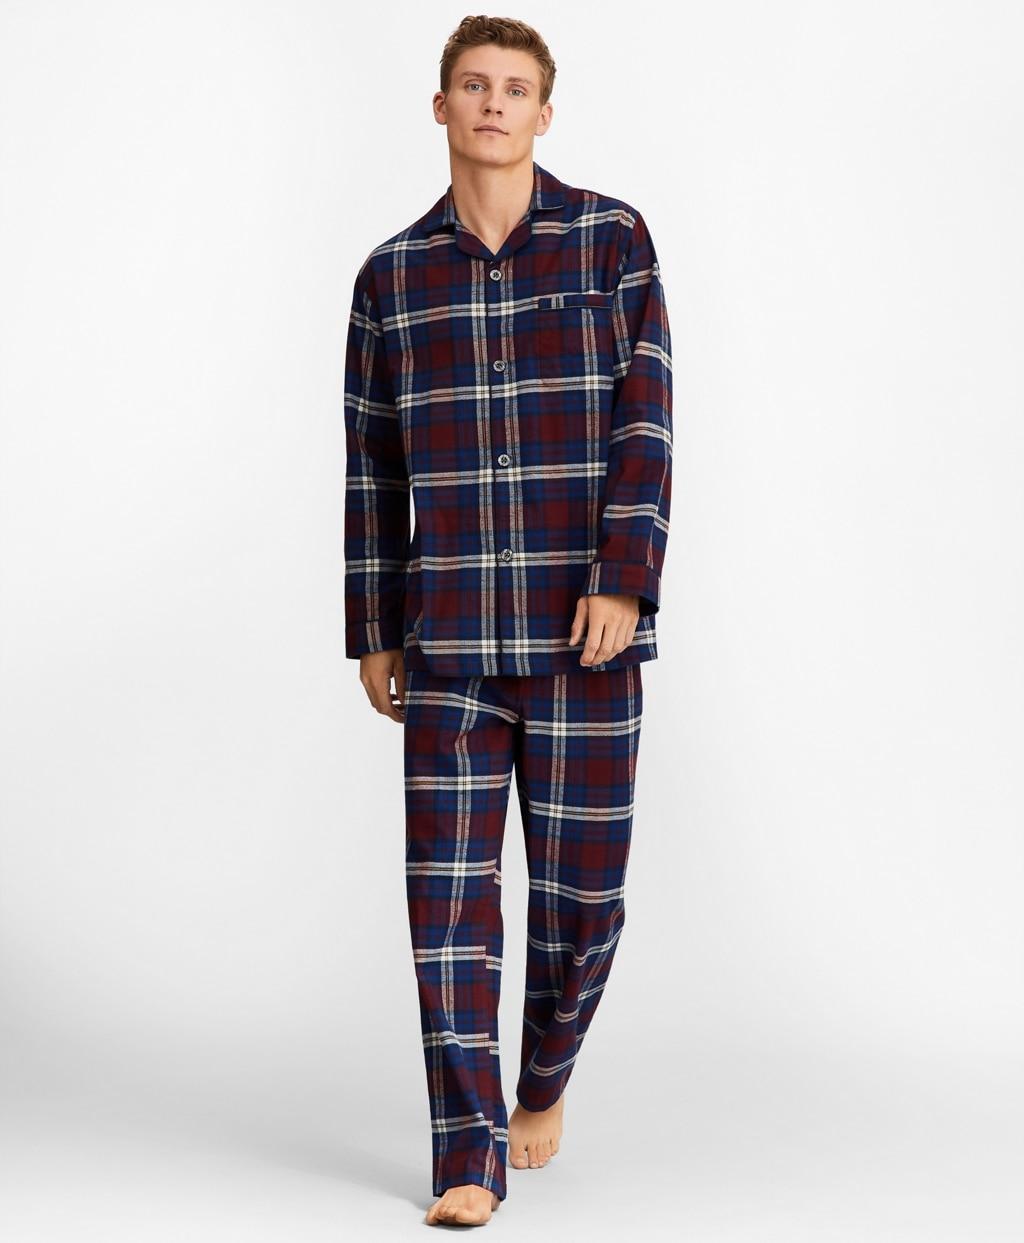 Brooks Brothers Signature Tartan Flannel Pajamas in Blue for Men - Lyst